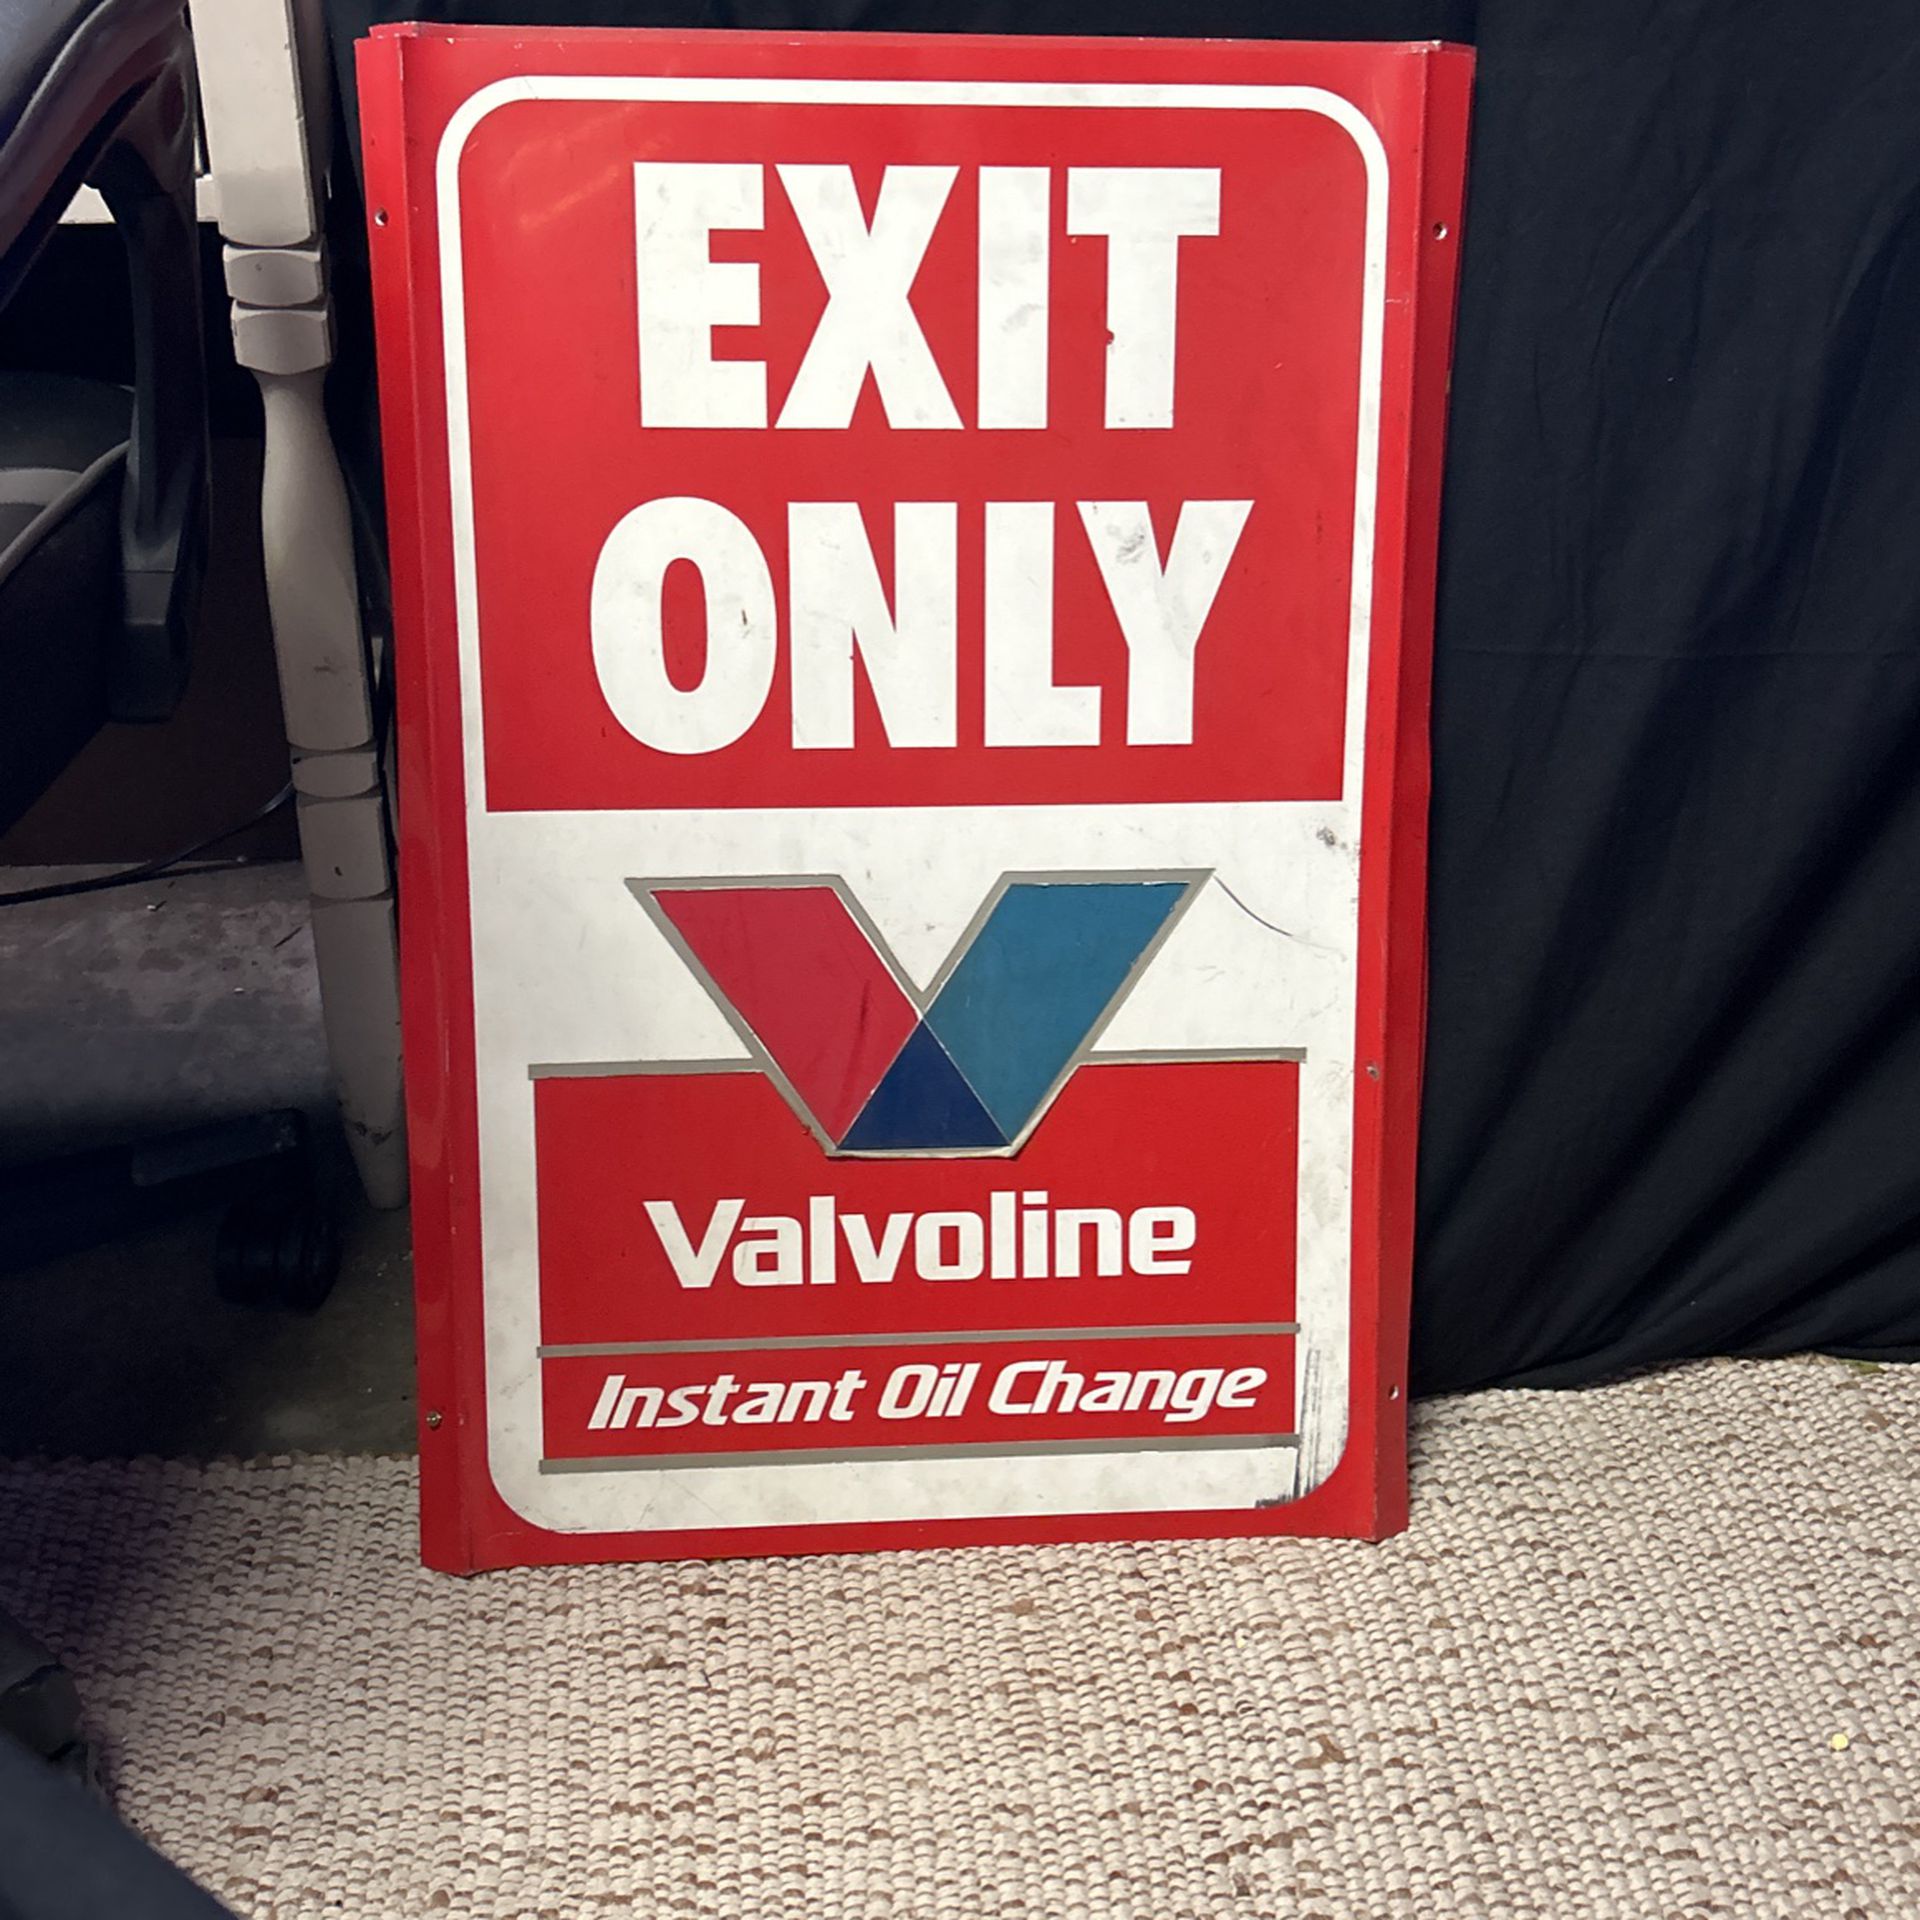 Some Pretty Nice Valvoline Oil Change Signs. I Don’t Know What Date They Are, But They Look Very Old.